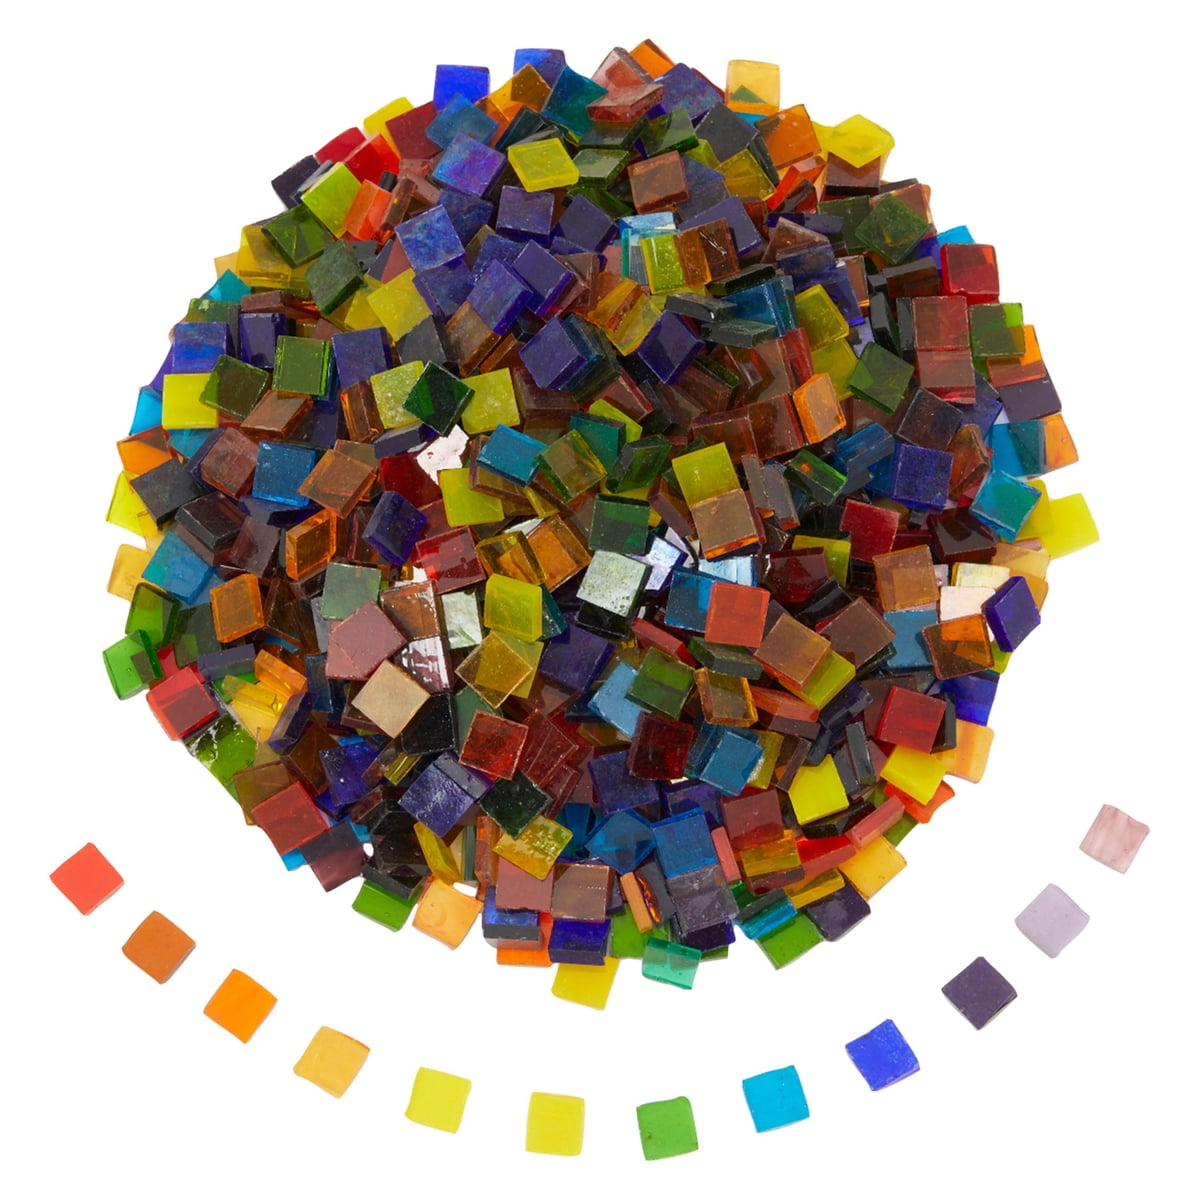 200g bag Mixed packs or separate colours Glass Pebbles for mosaics art craft 